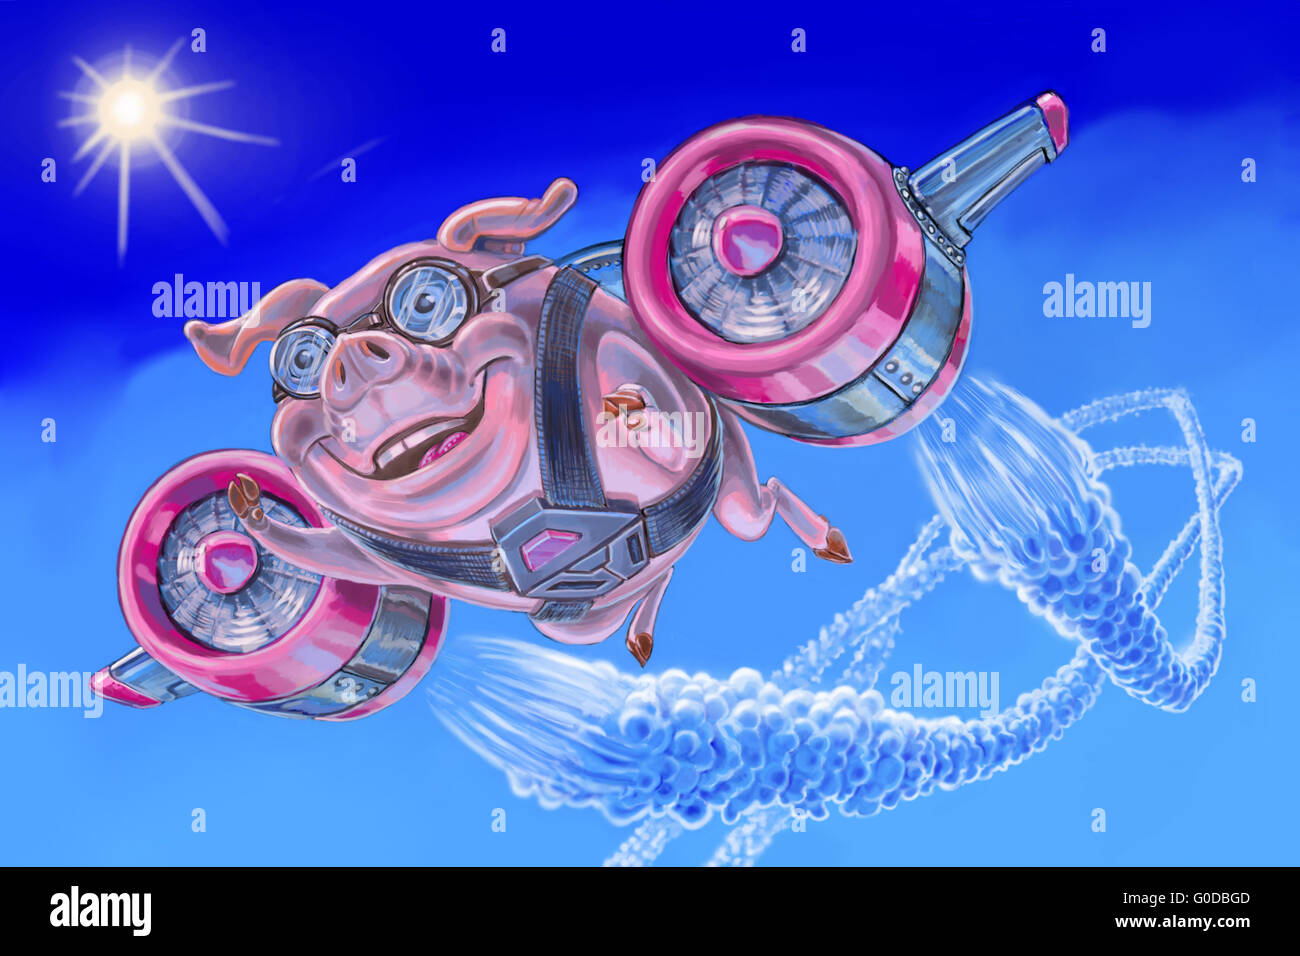 Illustration of a happy flying pig with a jet pack rocketing through the stratosphere leaving twin vapor trails. Stock Photo